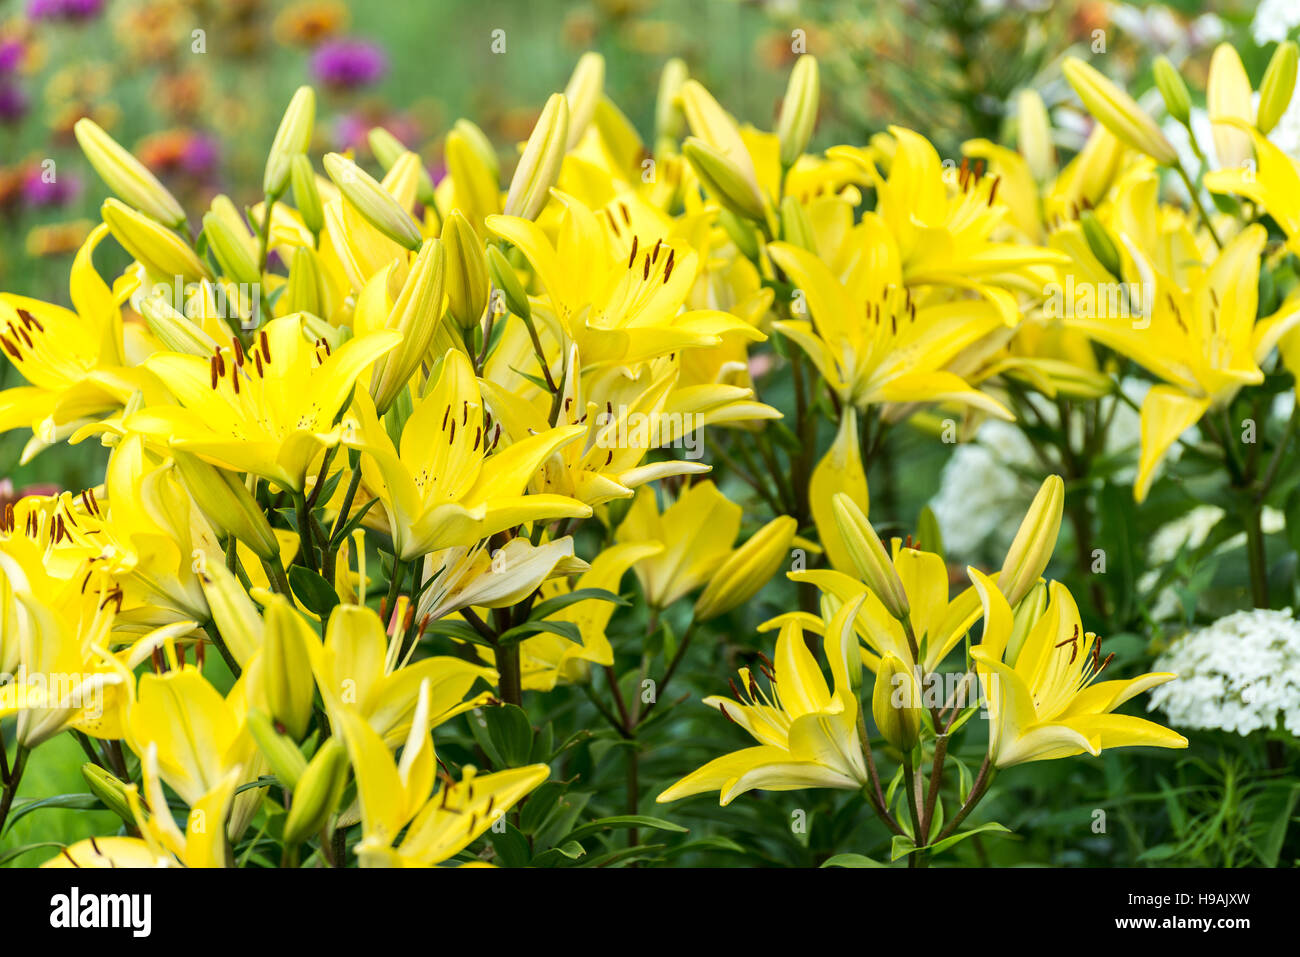 Lots of yellow lilies in flowerbed Stock Photo